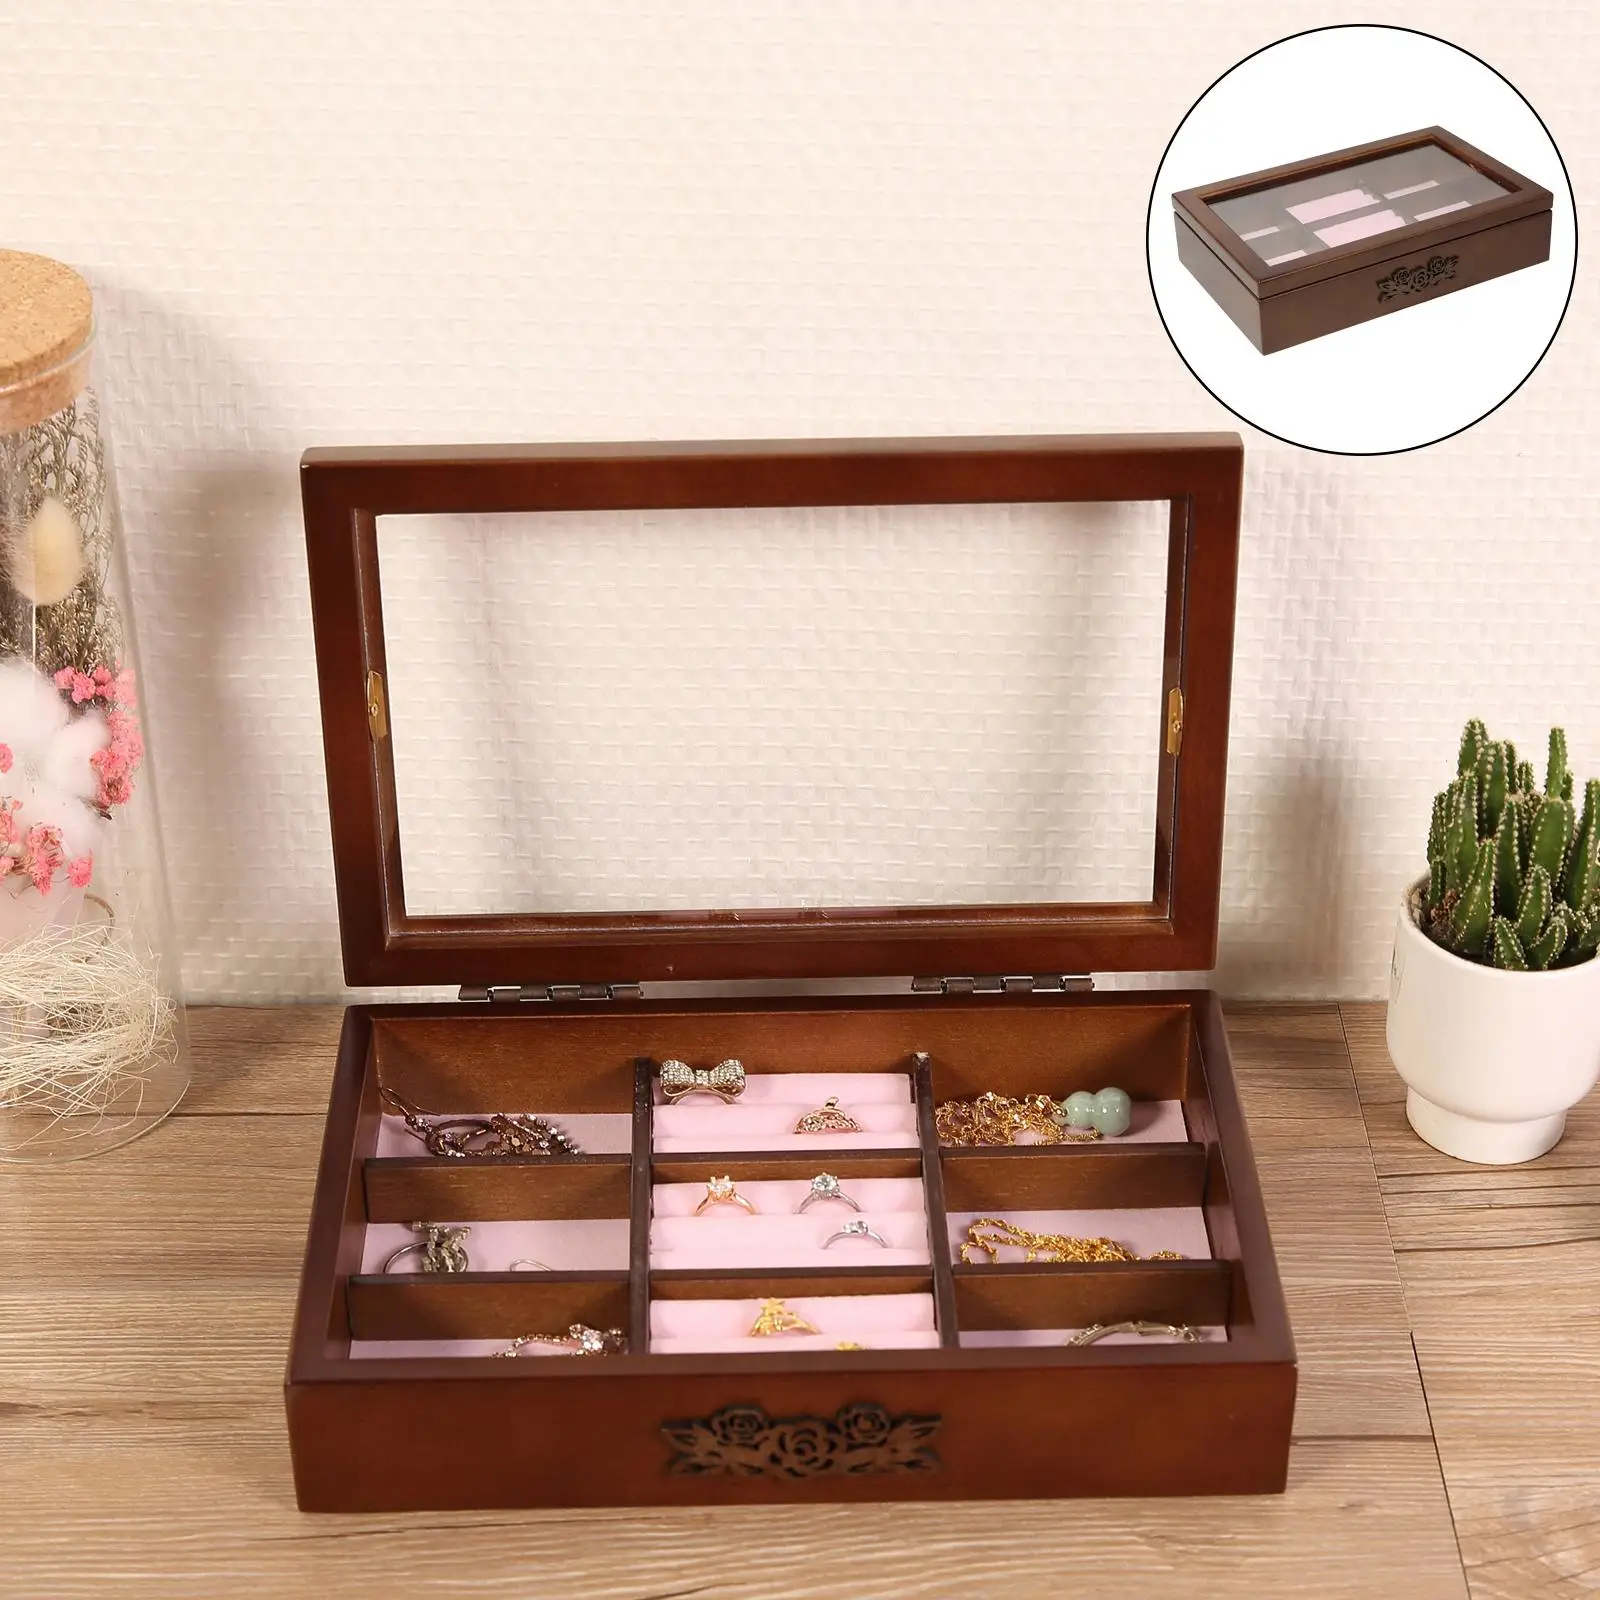 9 Slots Wooden Jewelry Storage Box Organizer for Earrings Rings Necklaces Watches